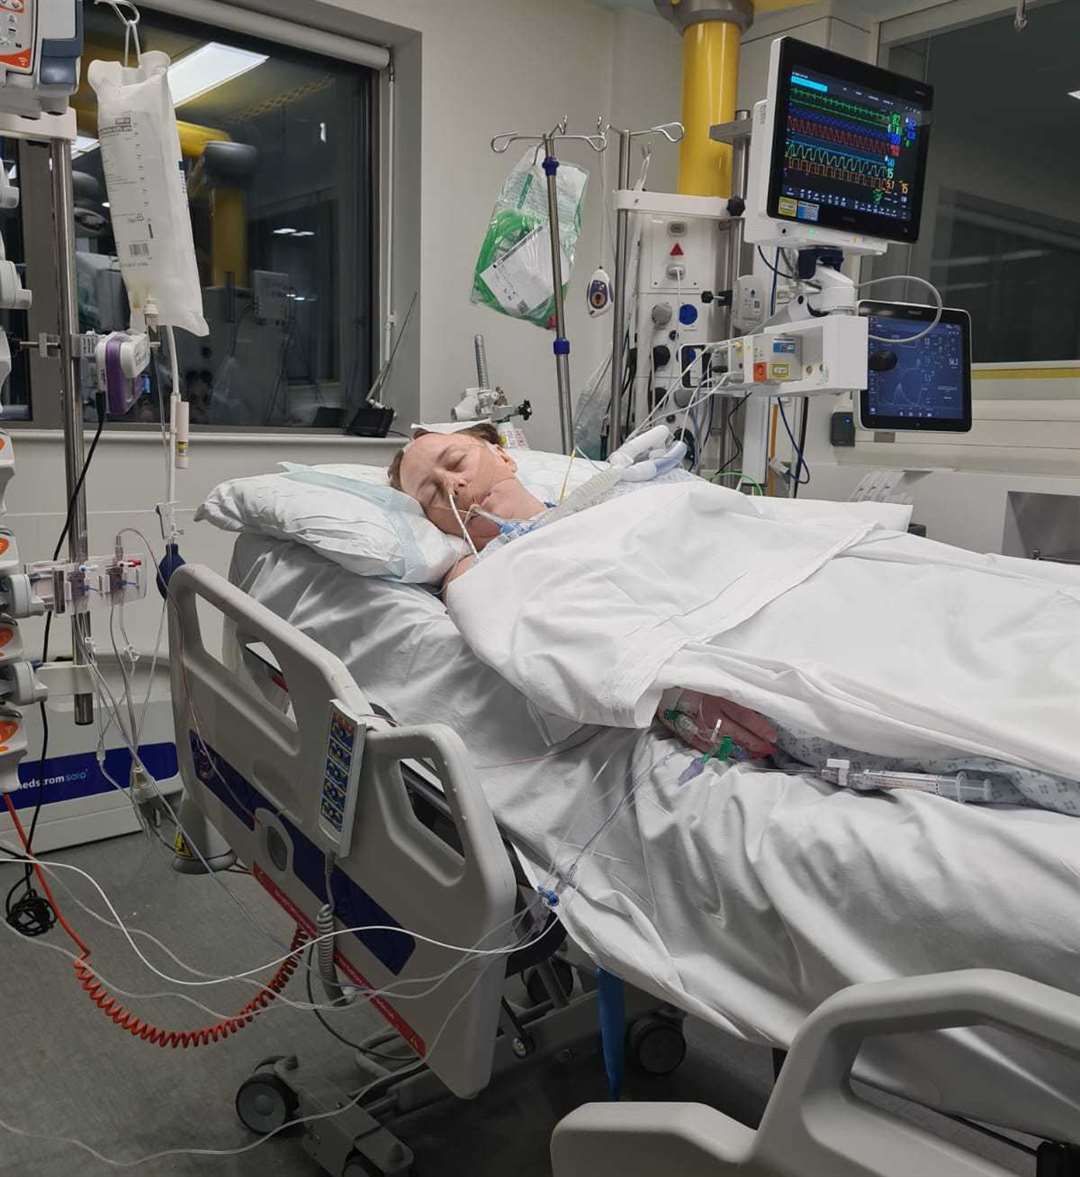 Amie Hodgson in the critical care unit at Kings College Hospital. Photo credit: Danny Hodgson